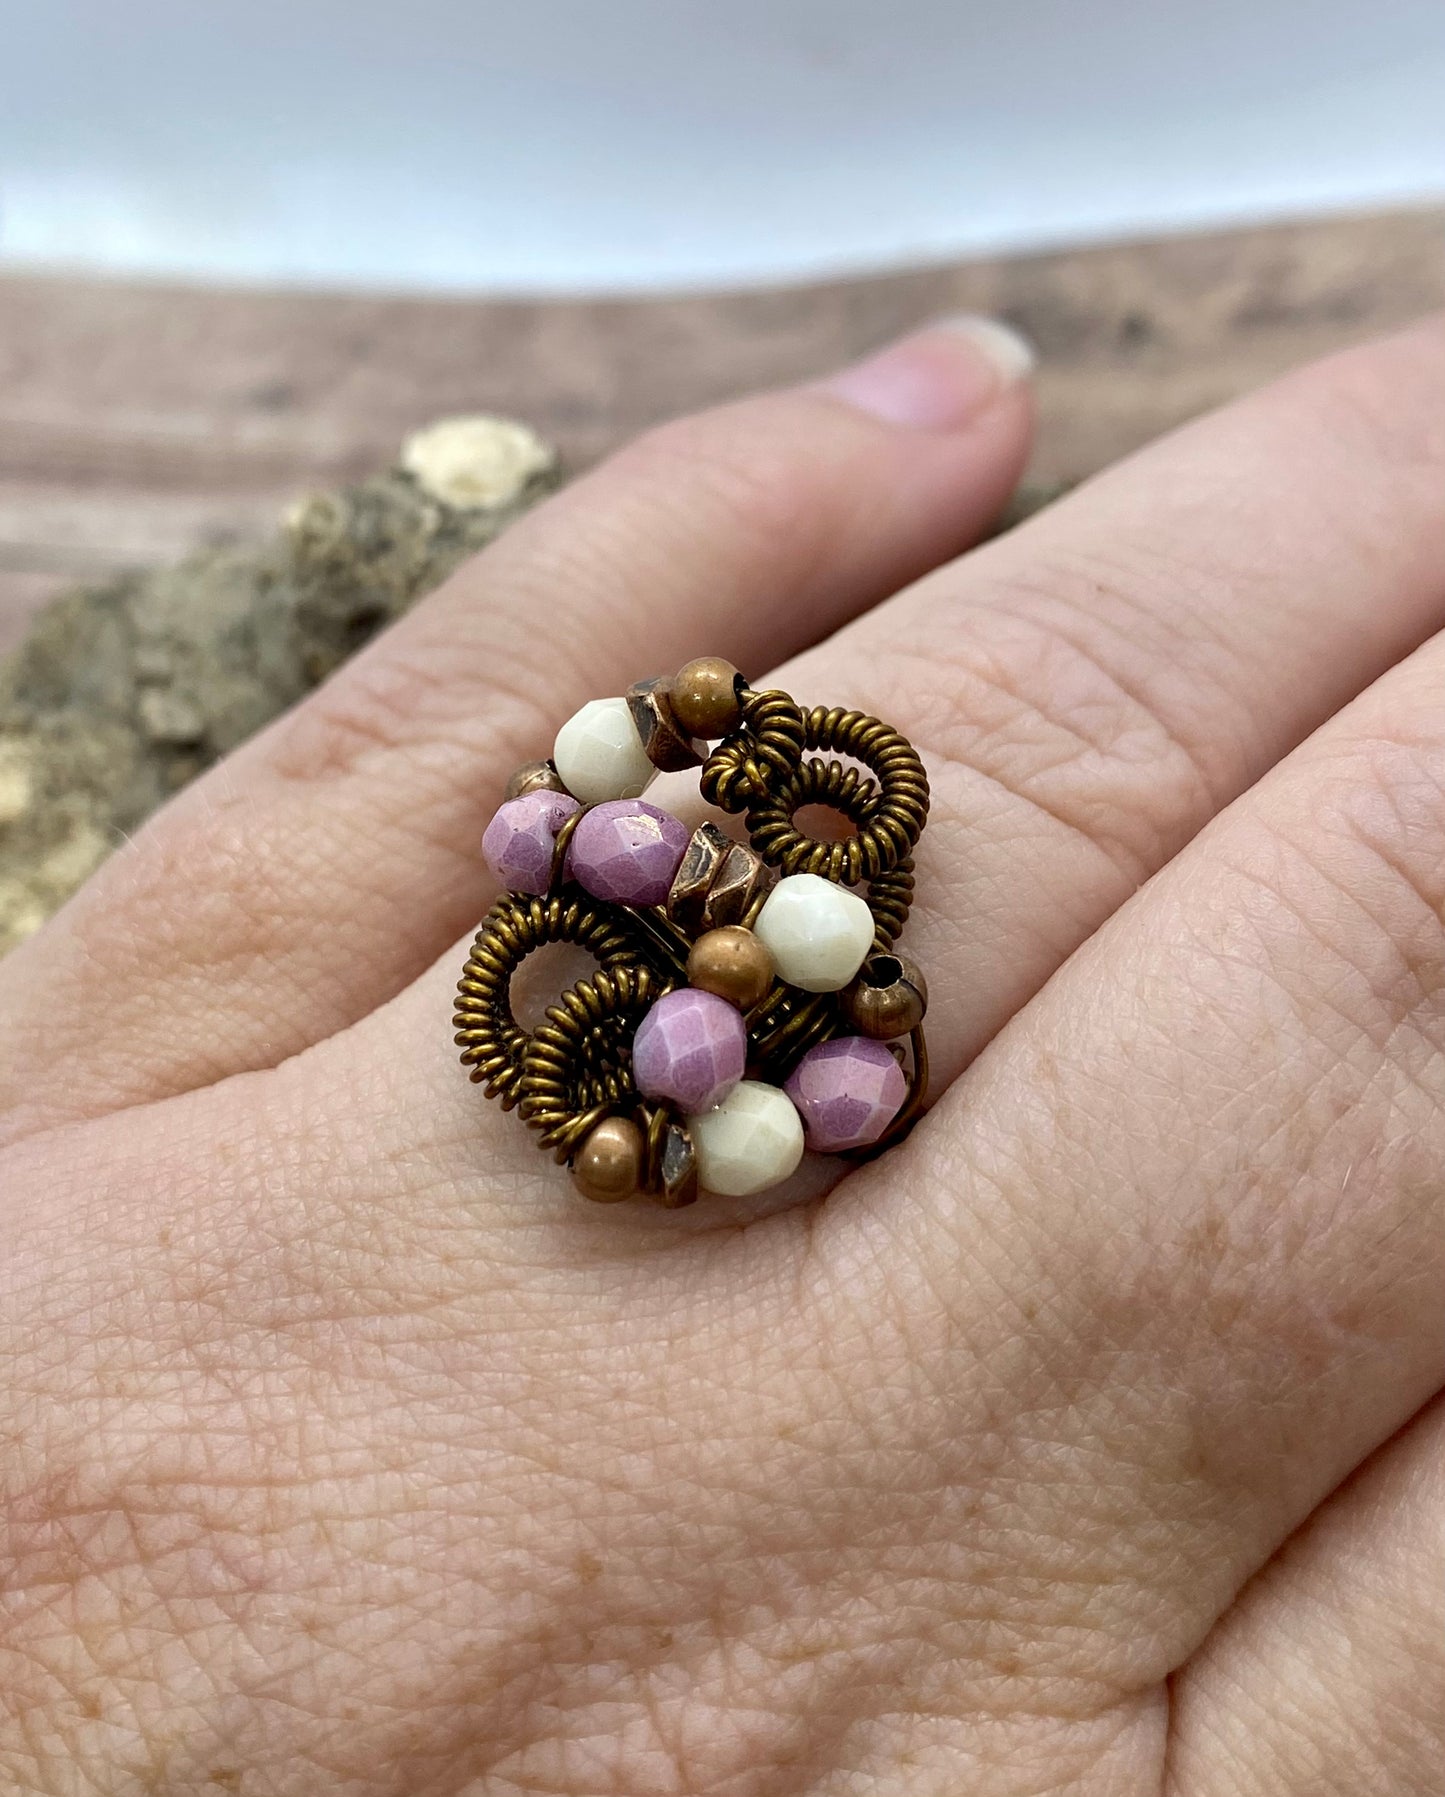 Size 10 handcrafted ring item #1123-03